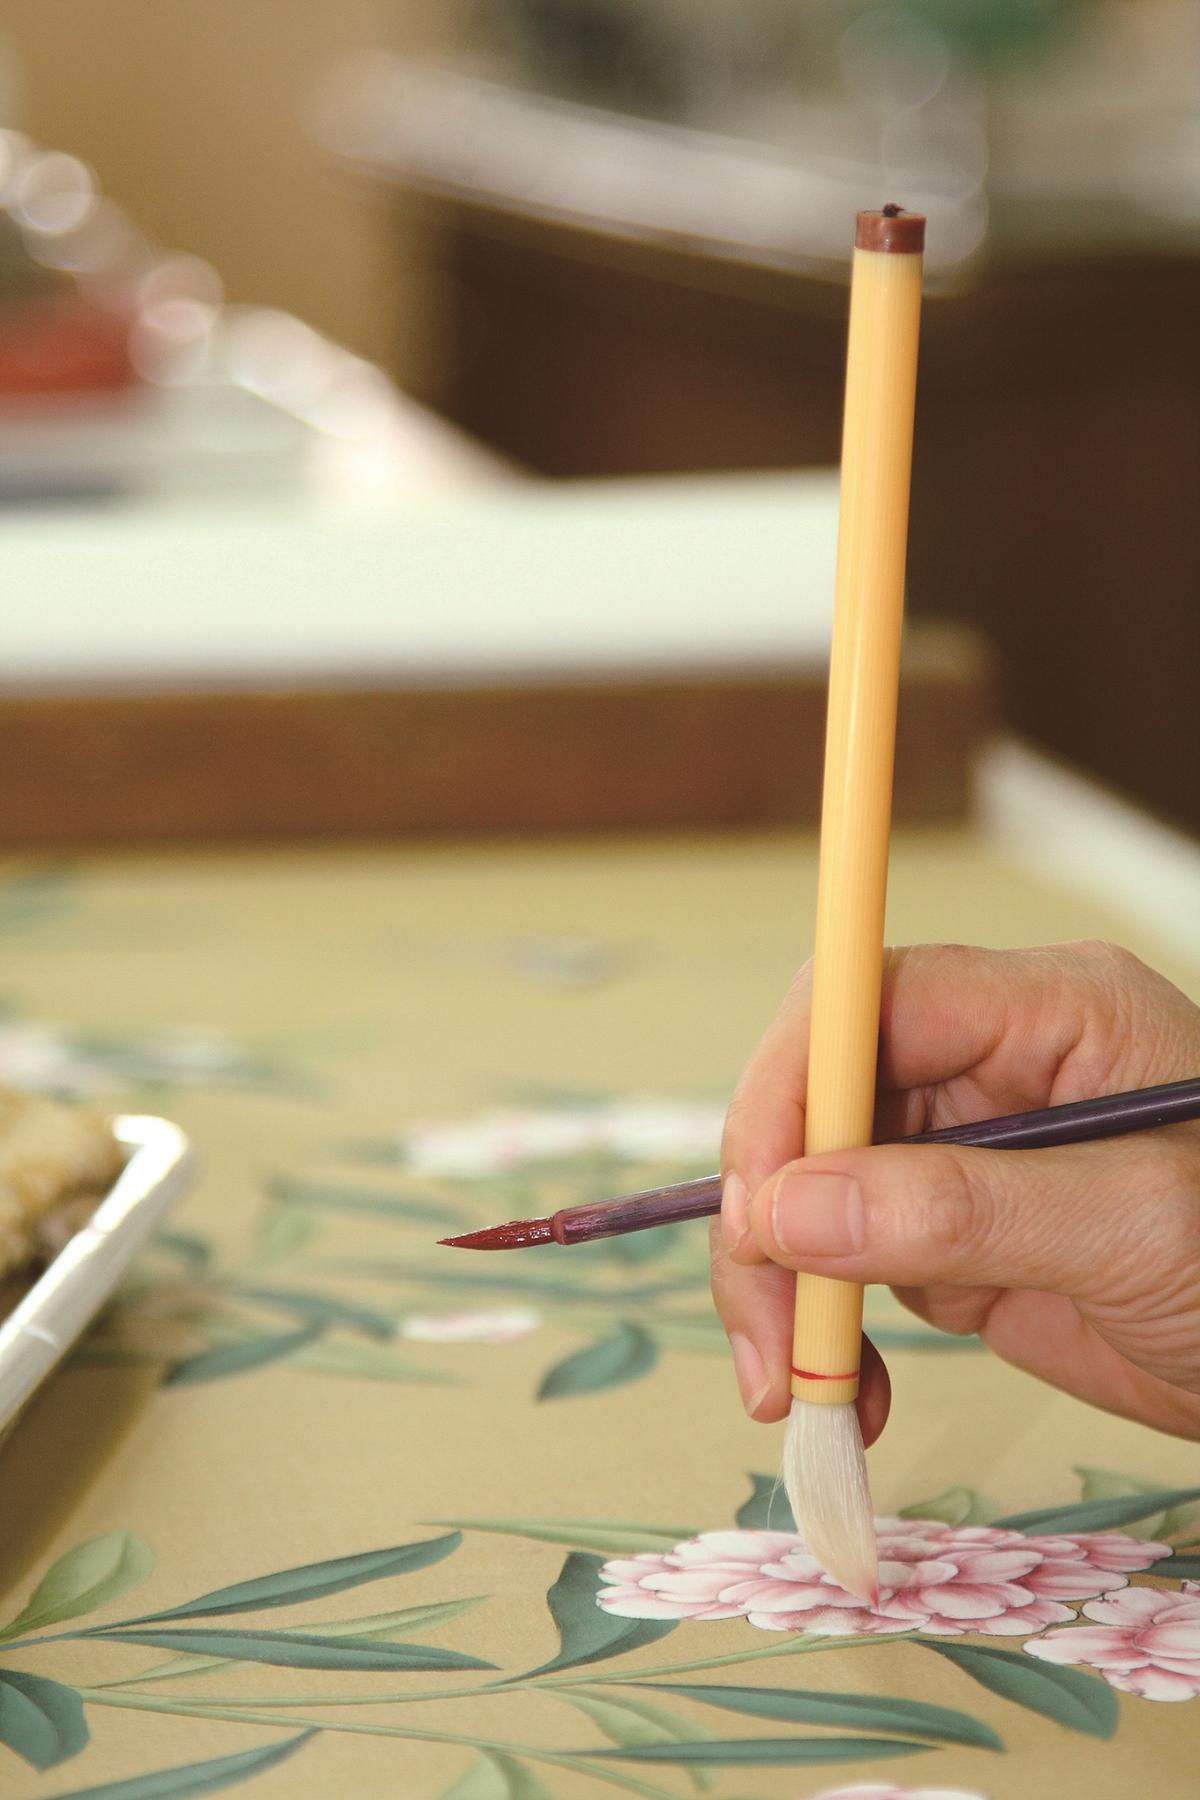 The intricate details and fine line work of hand-painted Chinoiserie wallcoverings are produced by highly skilled artists. It's a labor-intensive procedure. Every studio is slightly different. For Gracie Studio, each panel requires about 75 to 100 hours of artwork. (Courtesy of Gracie Studio)